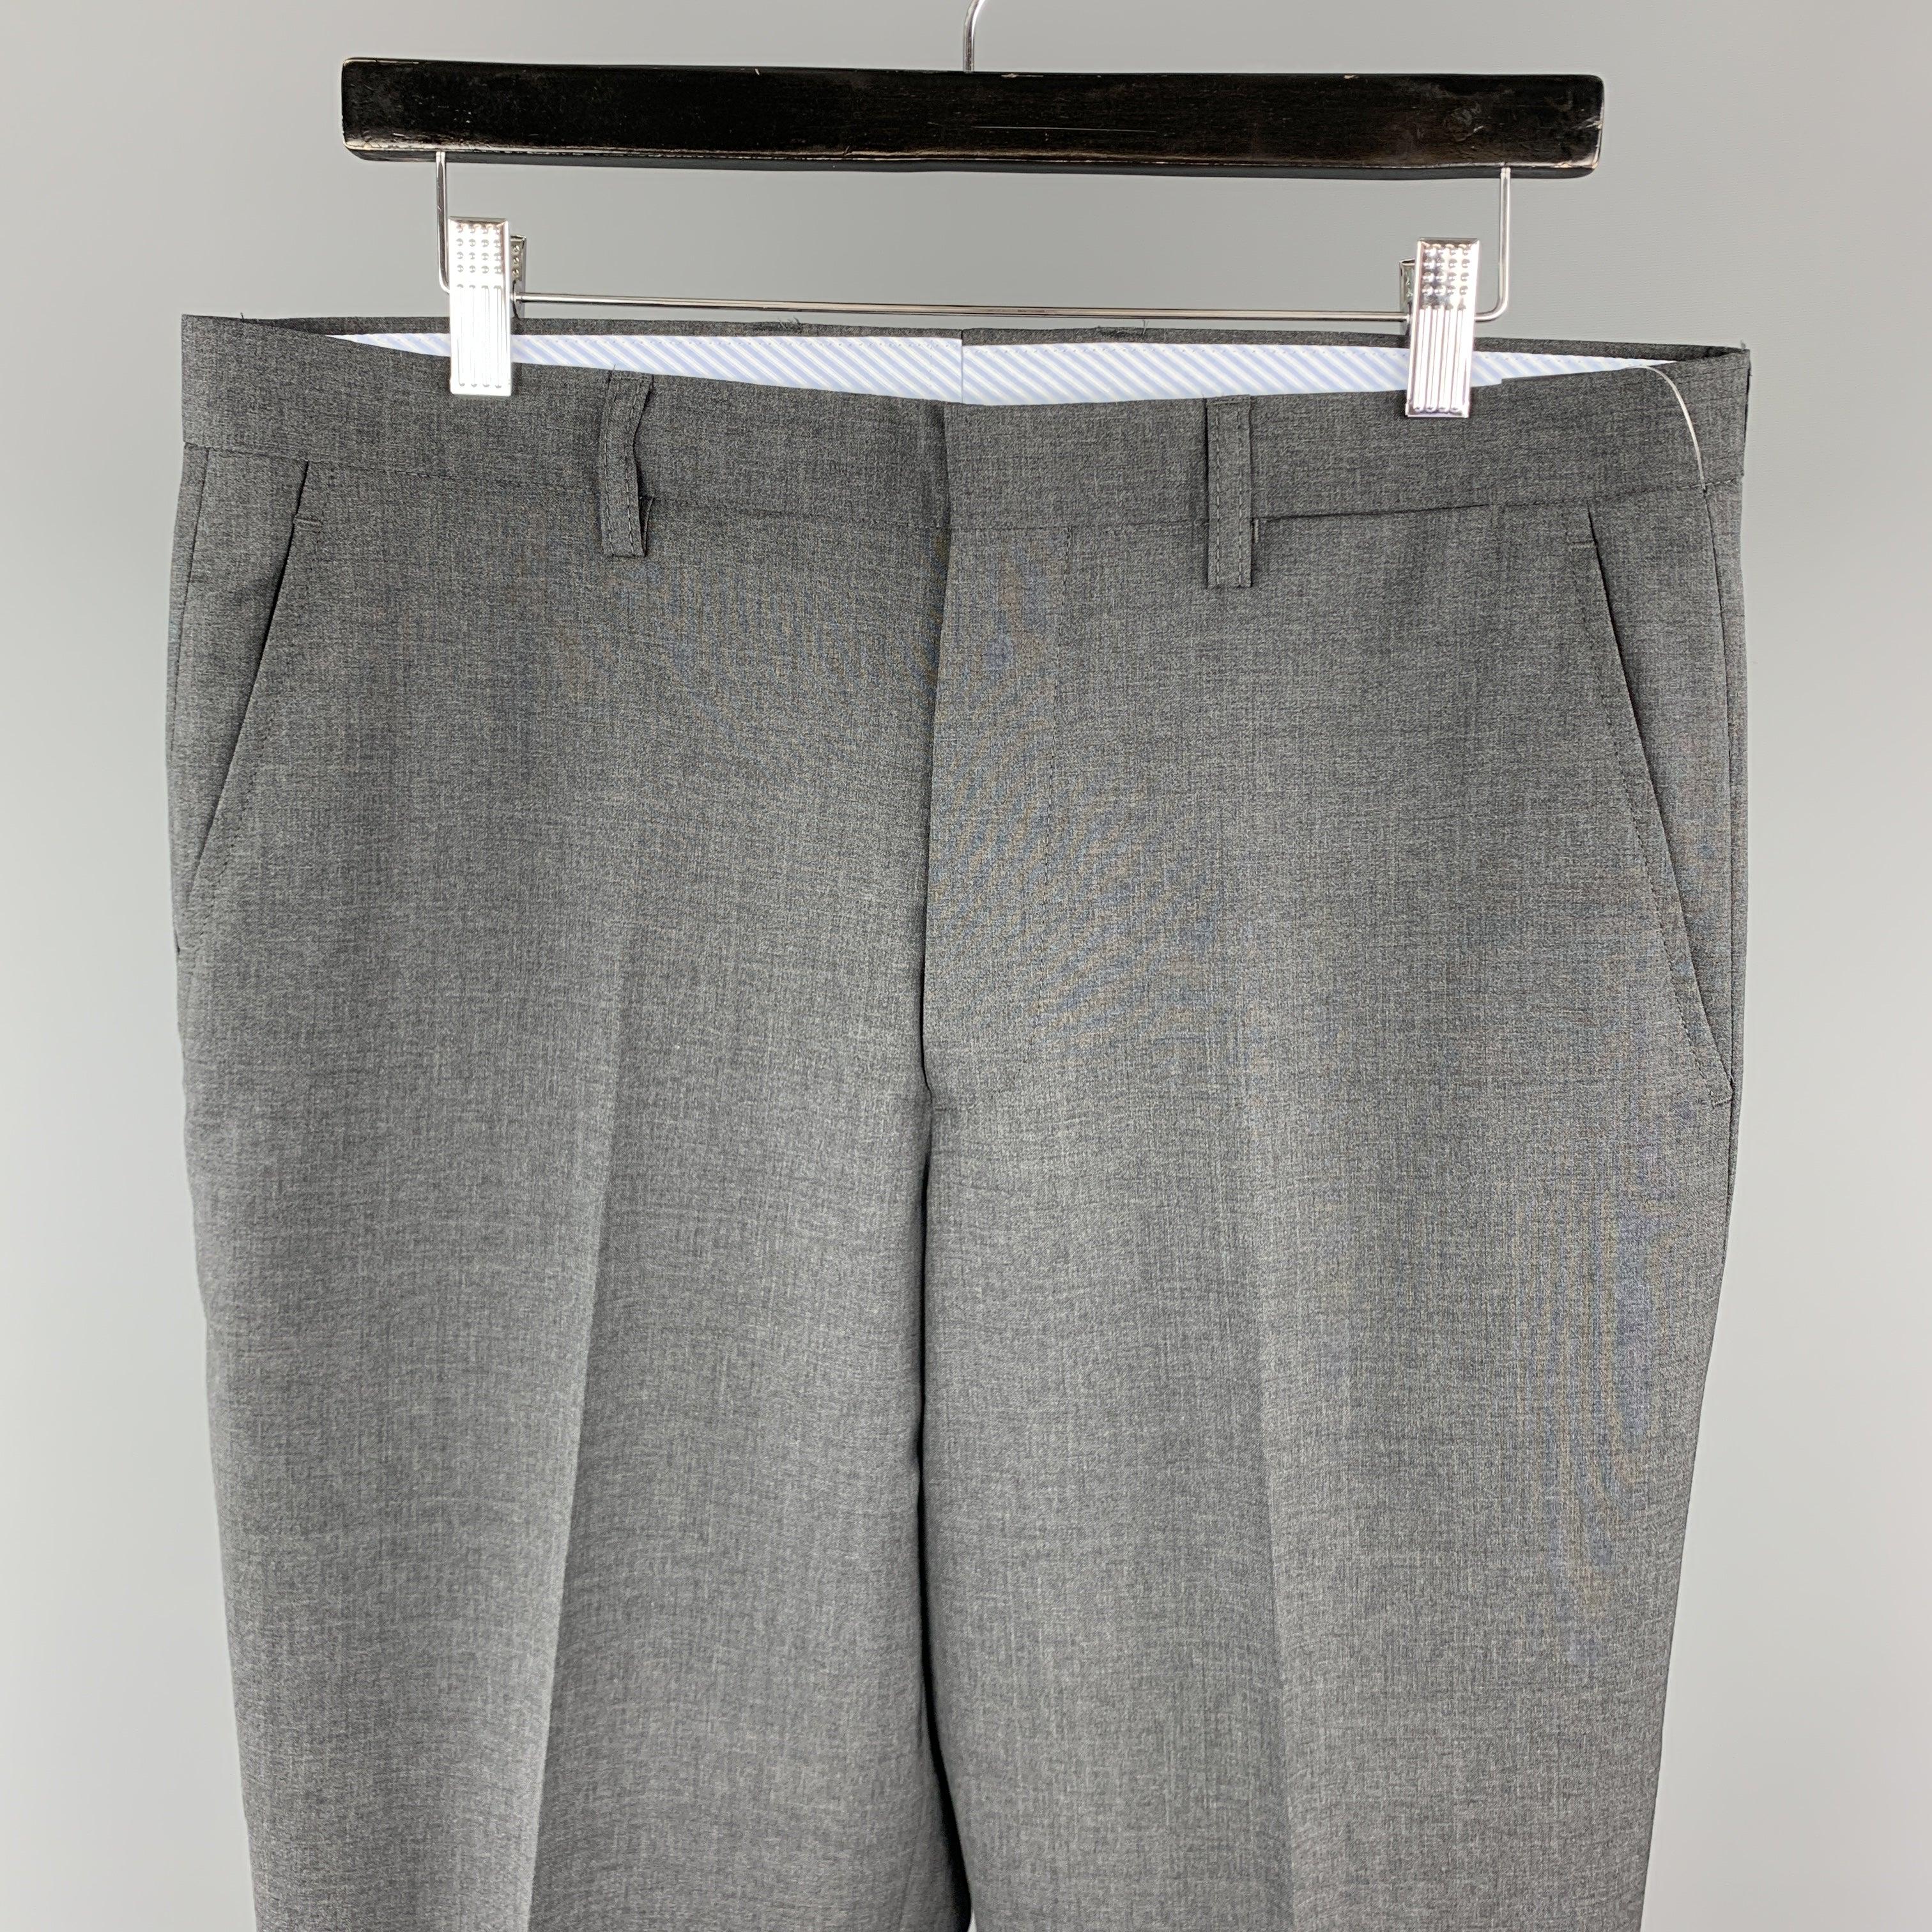 ETRO
dress pants comes in a solid dark gray wool material, featuring a flat front style, zip fly, and seam and slit pockets. Made in Italy.Excellent Pre-Owned Condition. 

Marked:   IT 50 

Measurements: 
  Waist: 35 inches 
Rise: 11 inches 
Inseam: